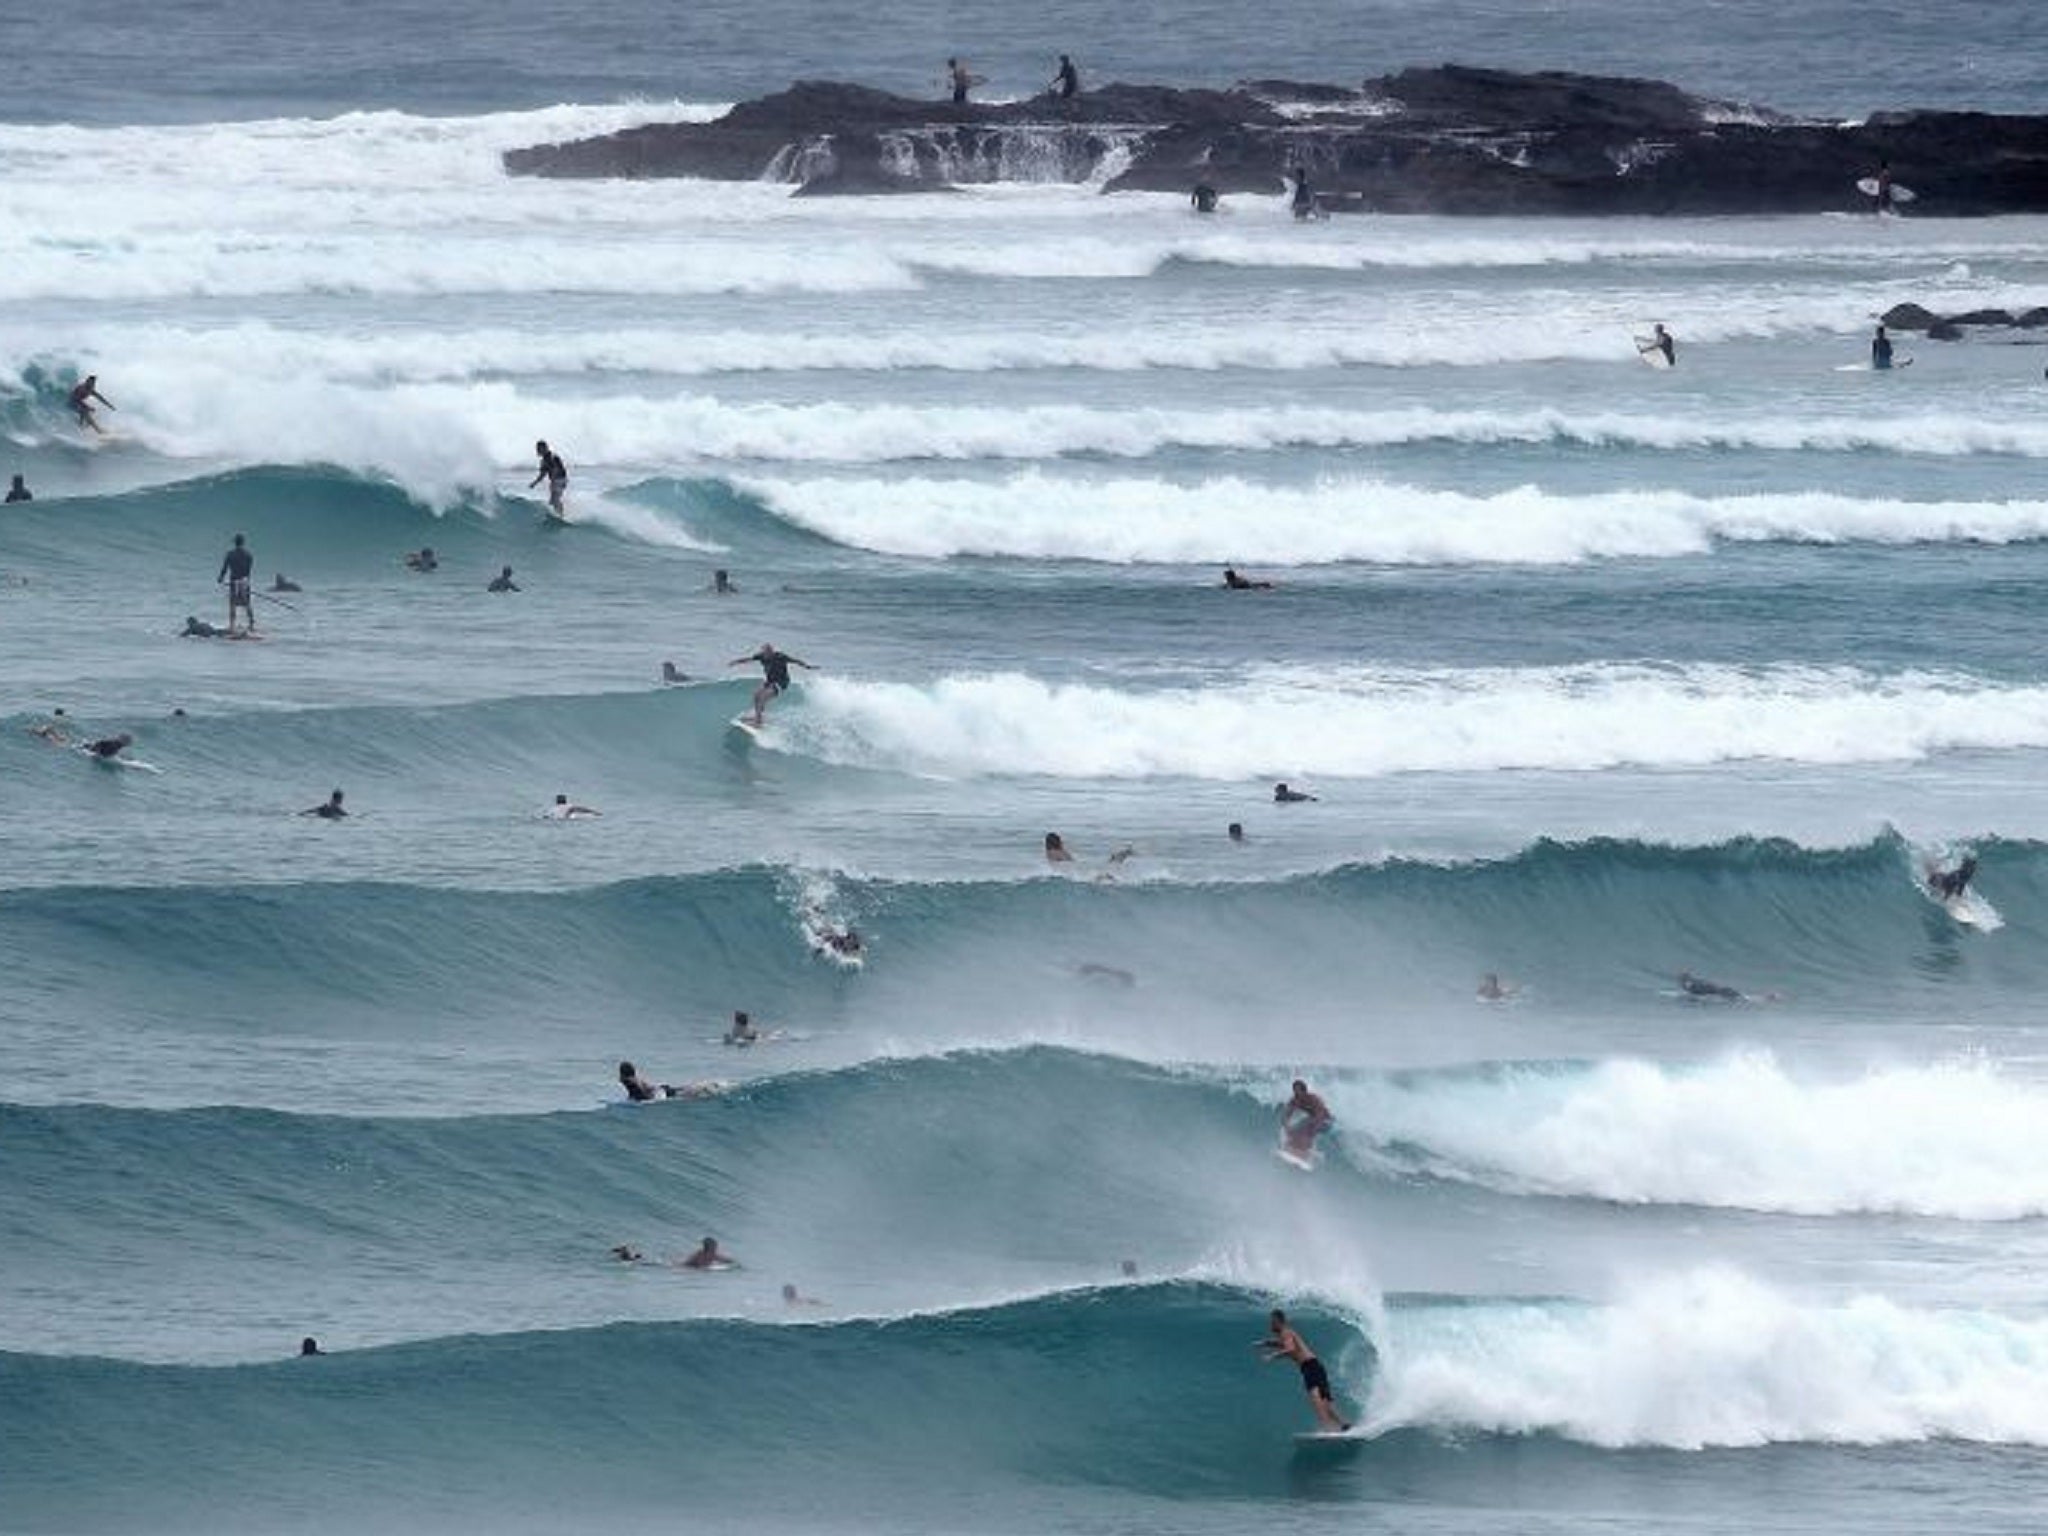 Surfers out in full-force during Cyclone Marcia in Australia